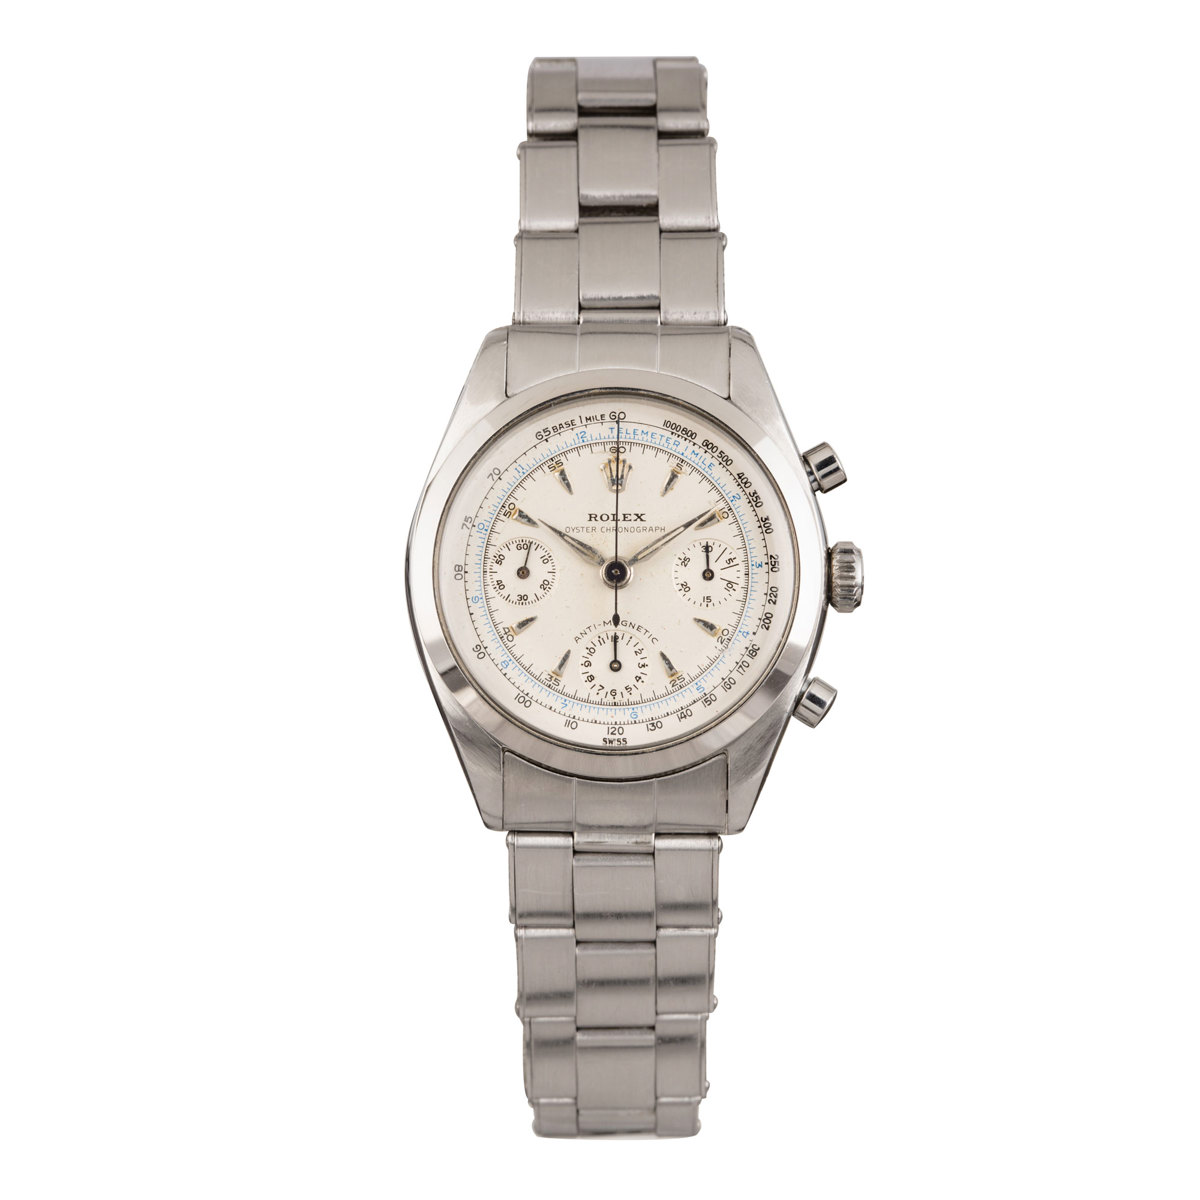 Rolex Pre-Daytona Ref 6234 A Stainless Steel Chronograph Wristwatch with Bracelet 1959 offered by Sotheby's